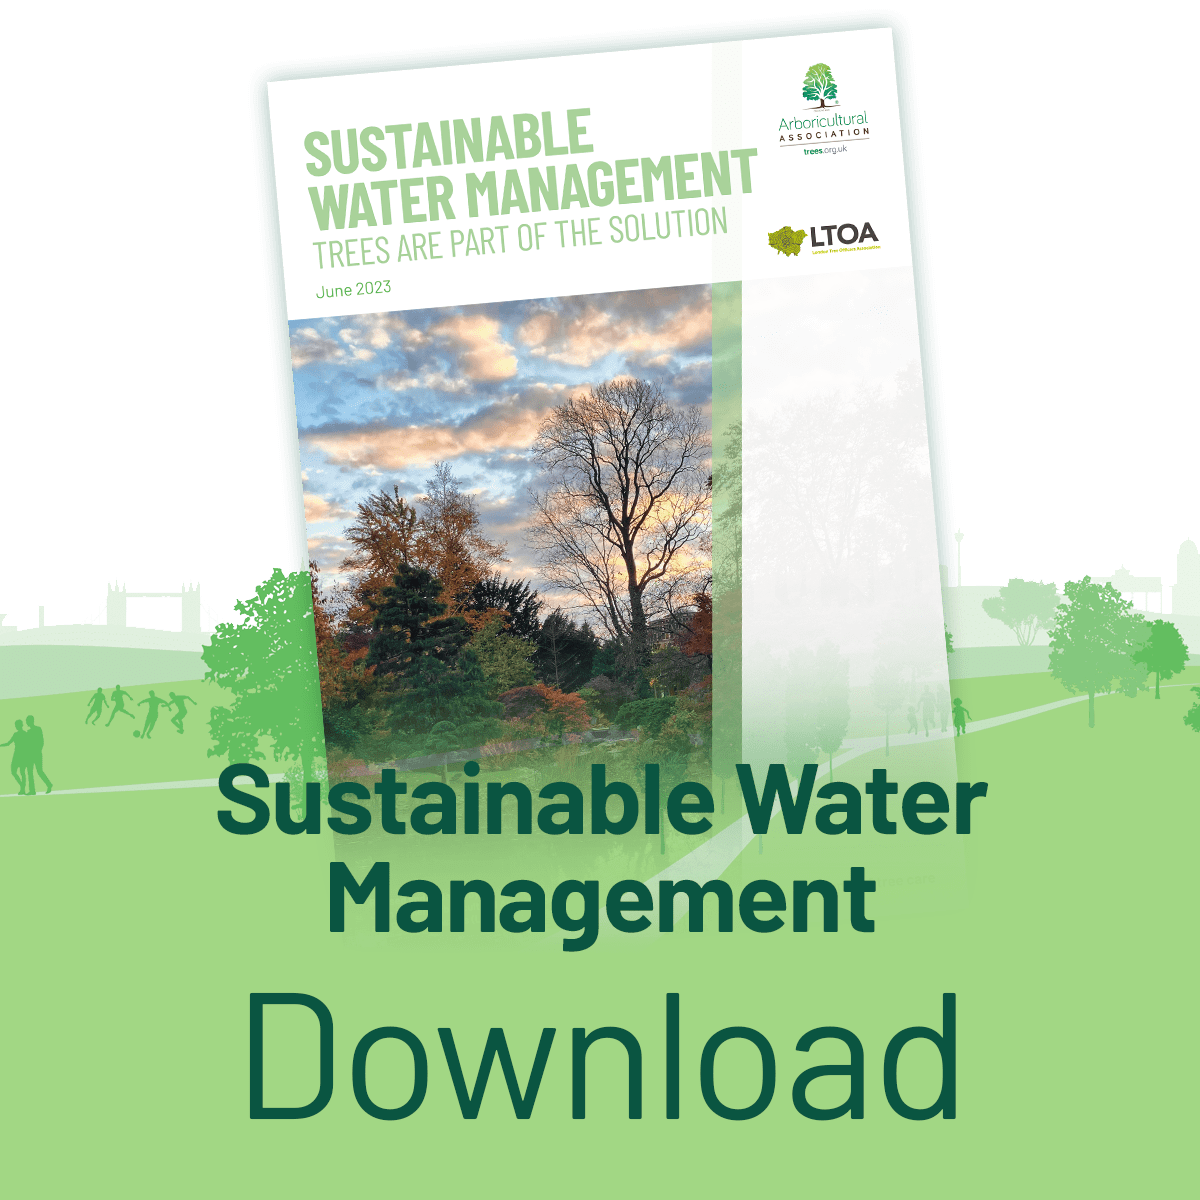 Download the Sustainable Water Management